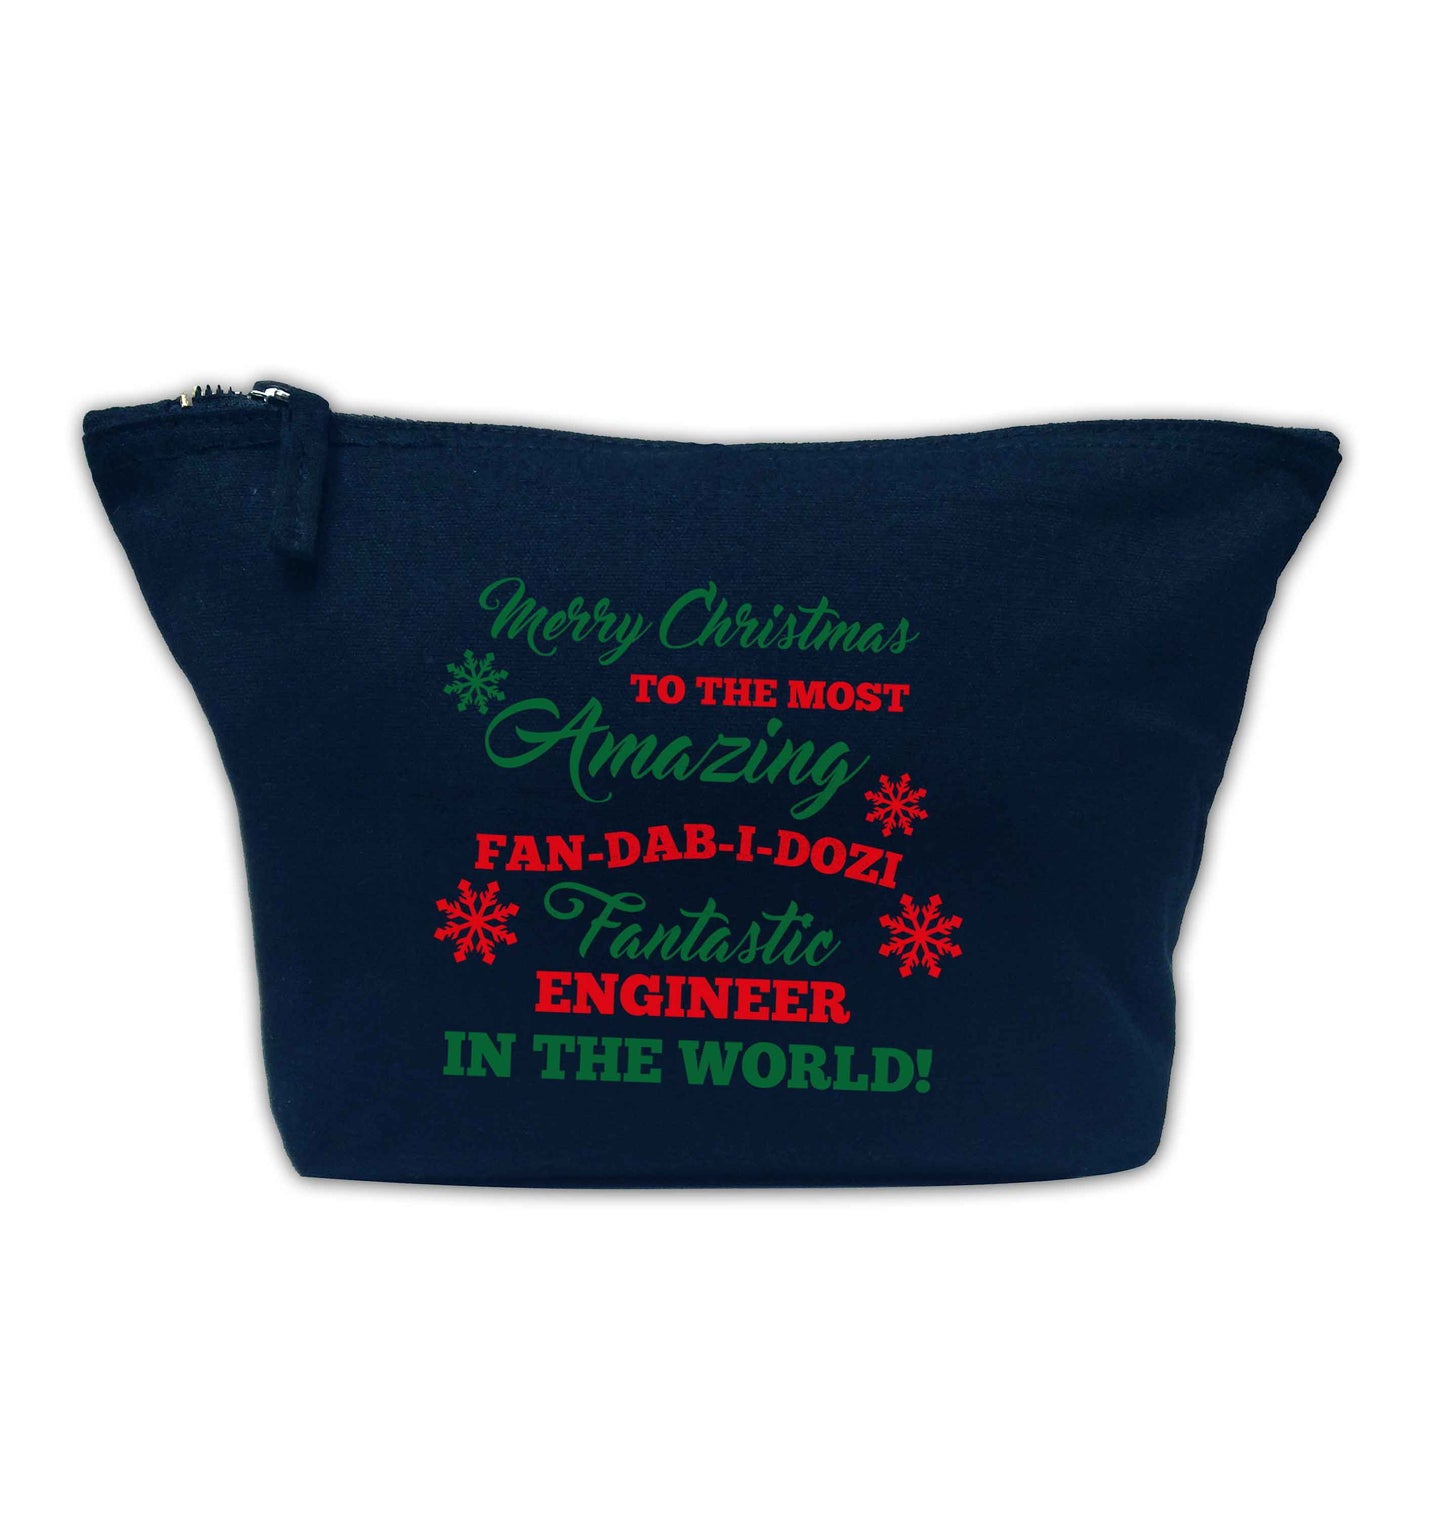 Merry Christmas to the most amazing engineer in the world! navy makeup bag